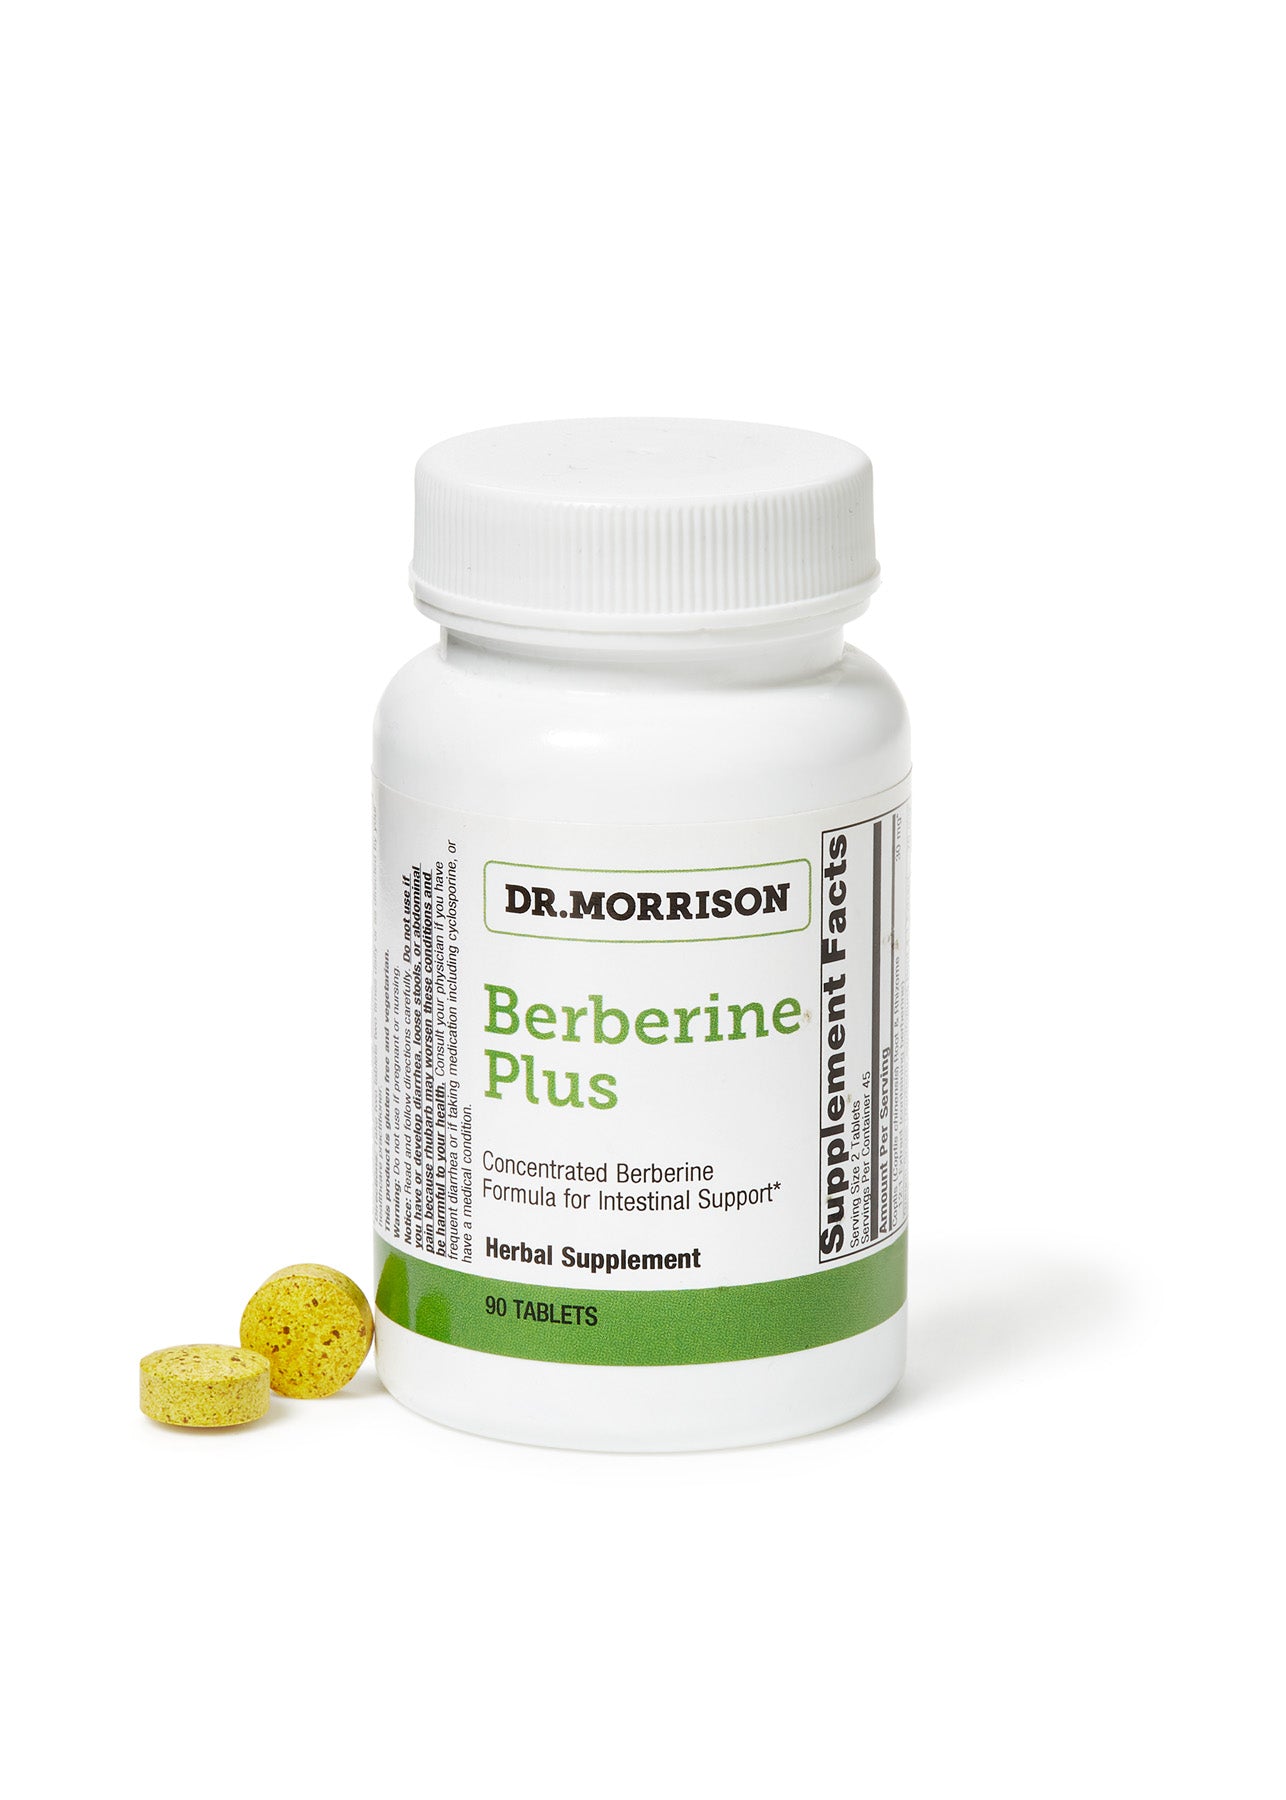 Berberine Plus Daily Benefit,Other Supplements Dr. Morrison Daily Benefit   